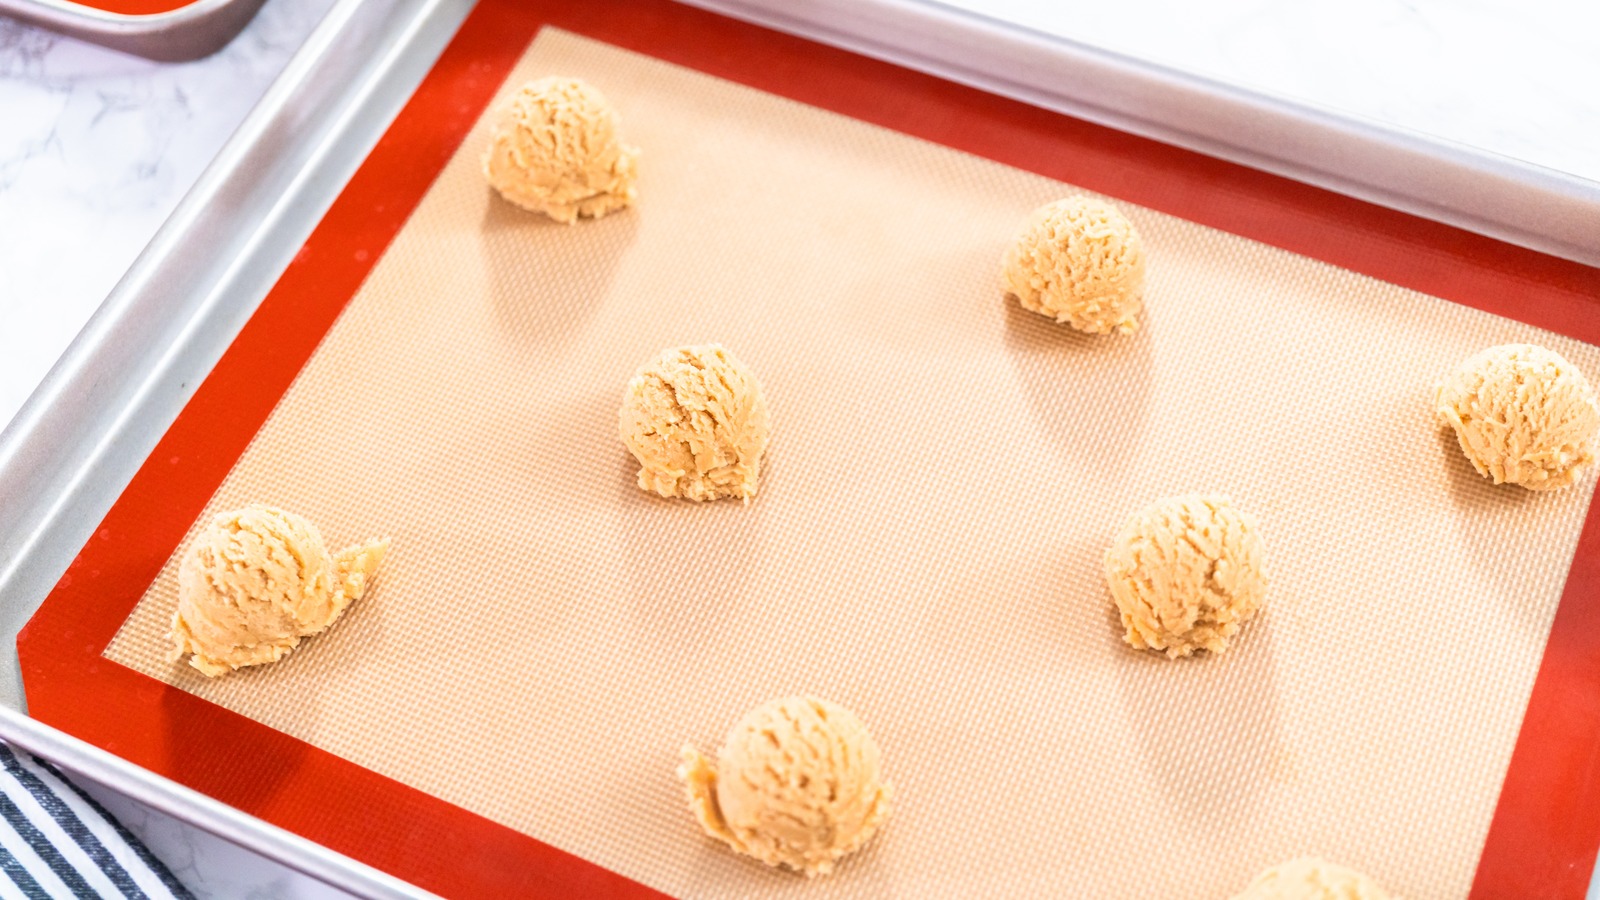 Leave Your Silicone Baking Mat In The Oven For Easy Clean Up